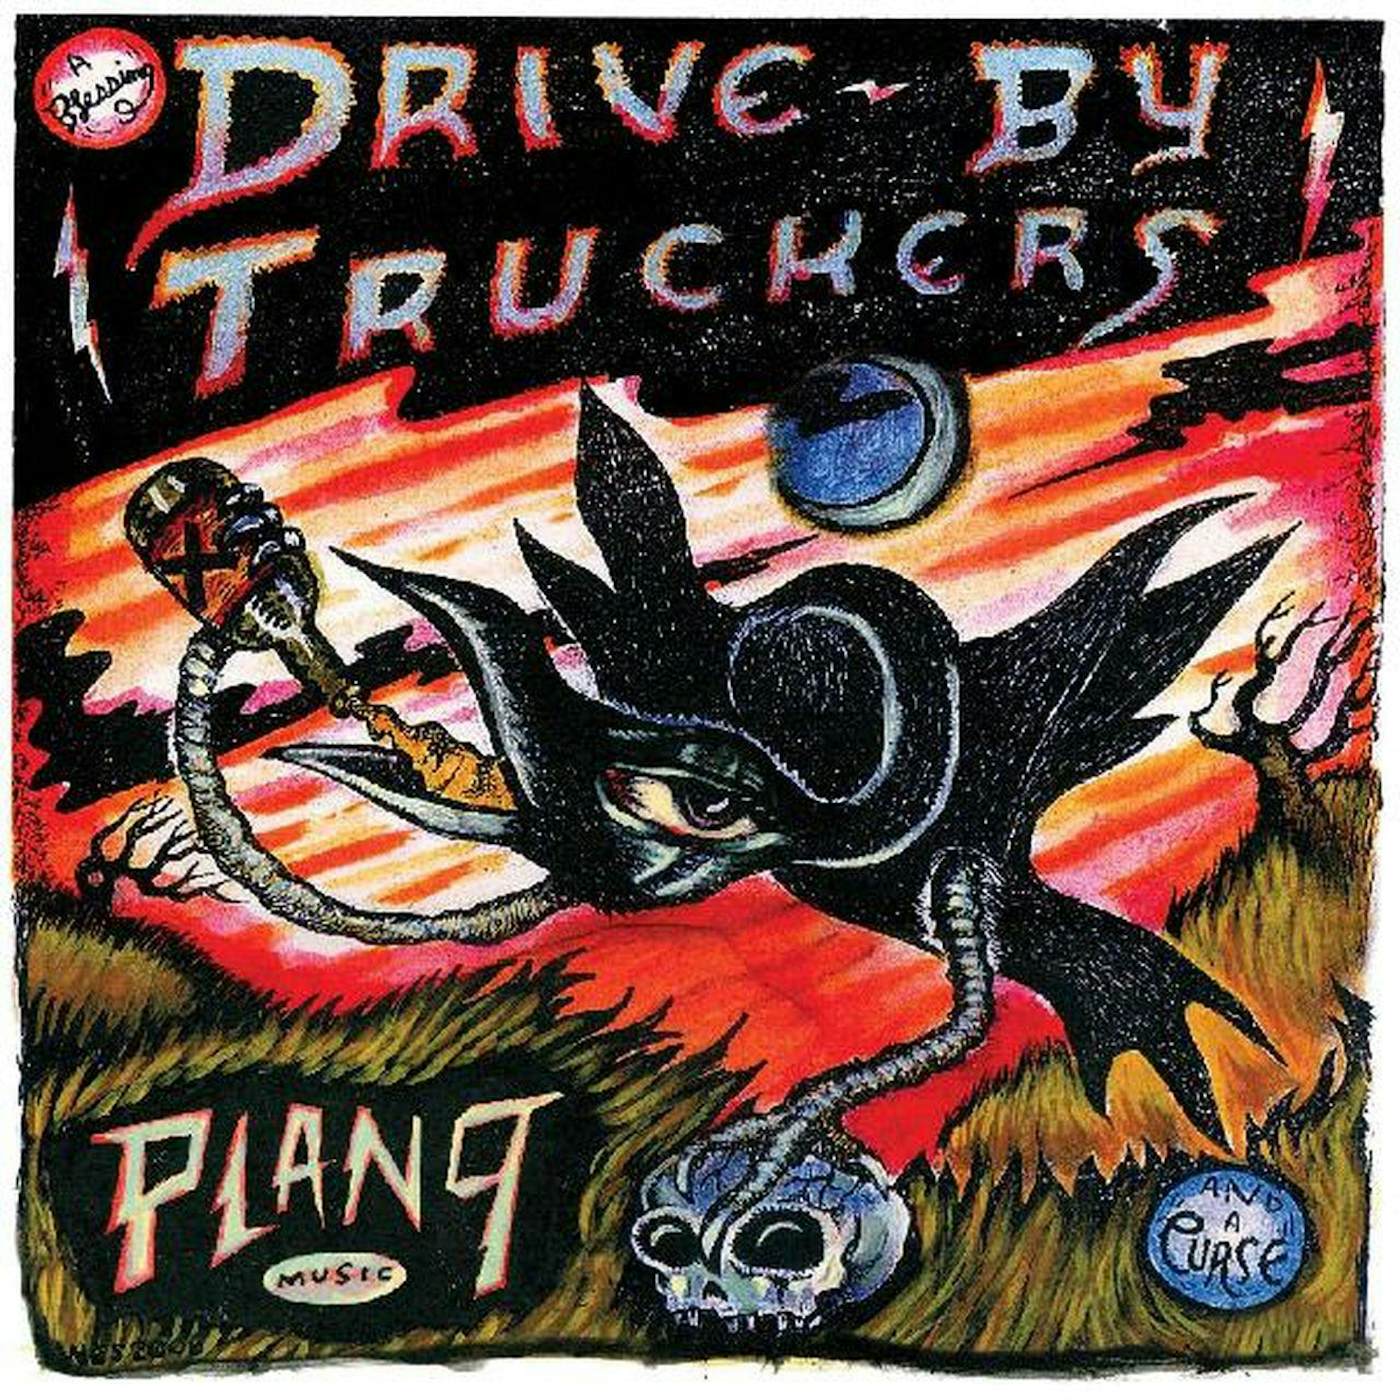 Drive-By Truckers Plan 9 Records July 13, 2006 Vinyl Record